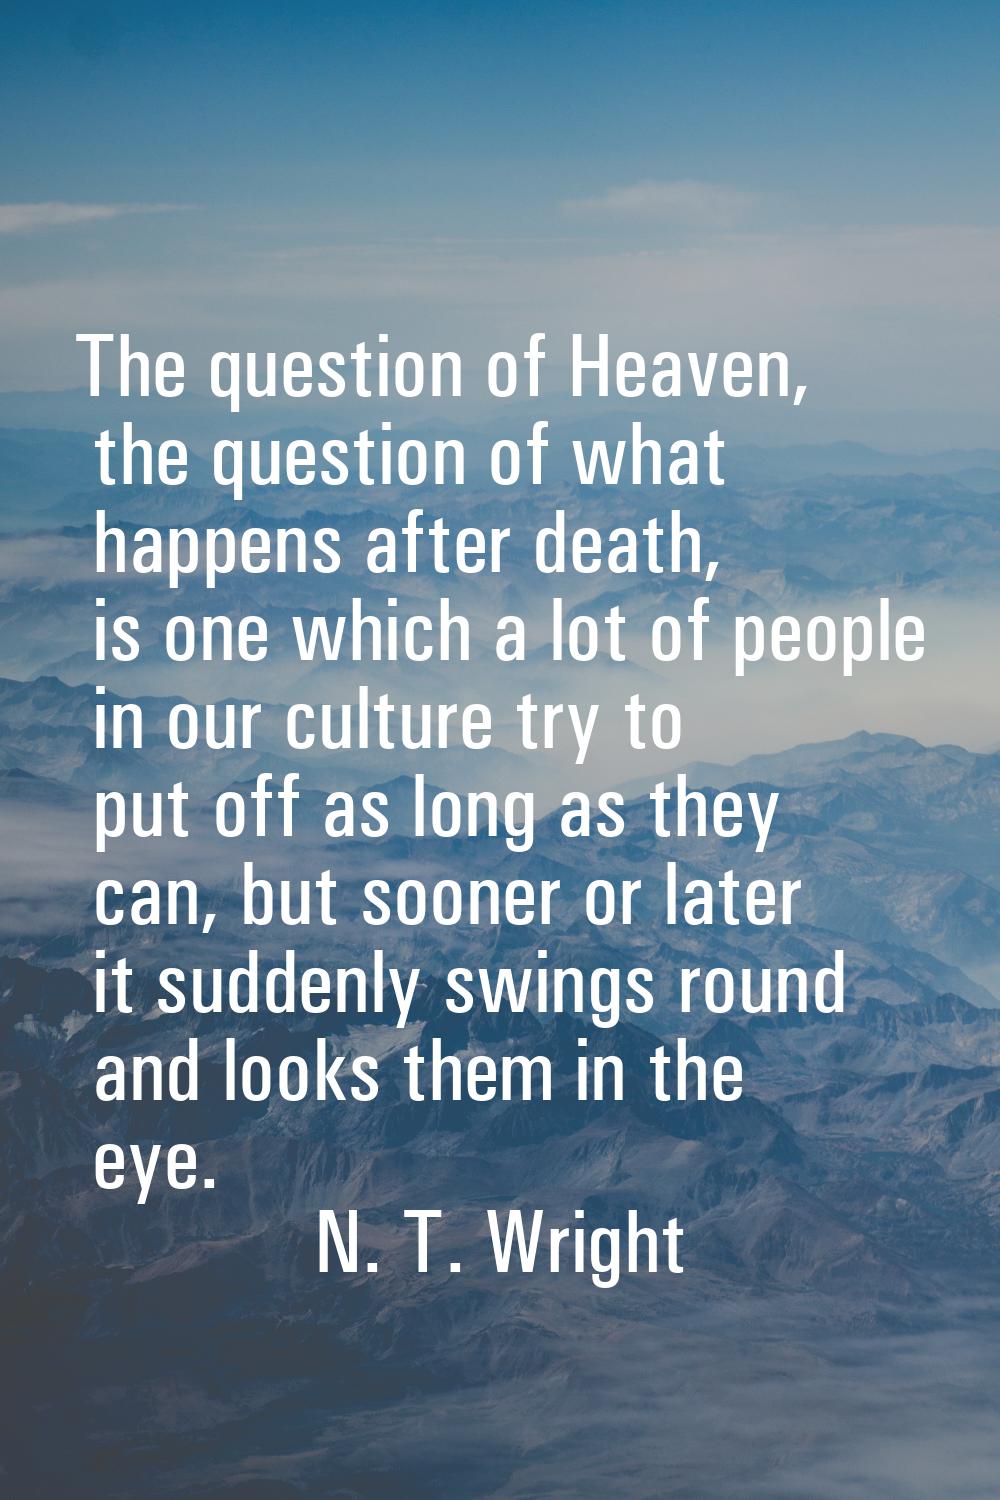 The question of Heaven, the question of what happens after death, is one which a lot of people in o